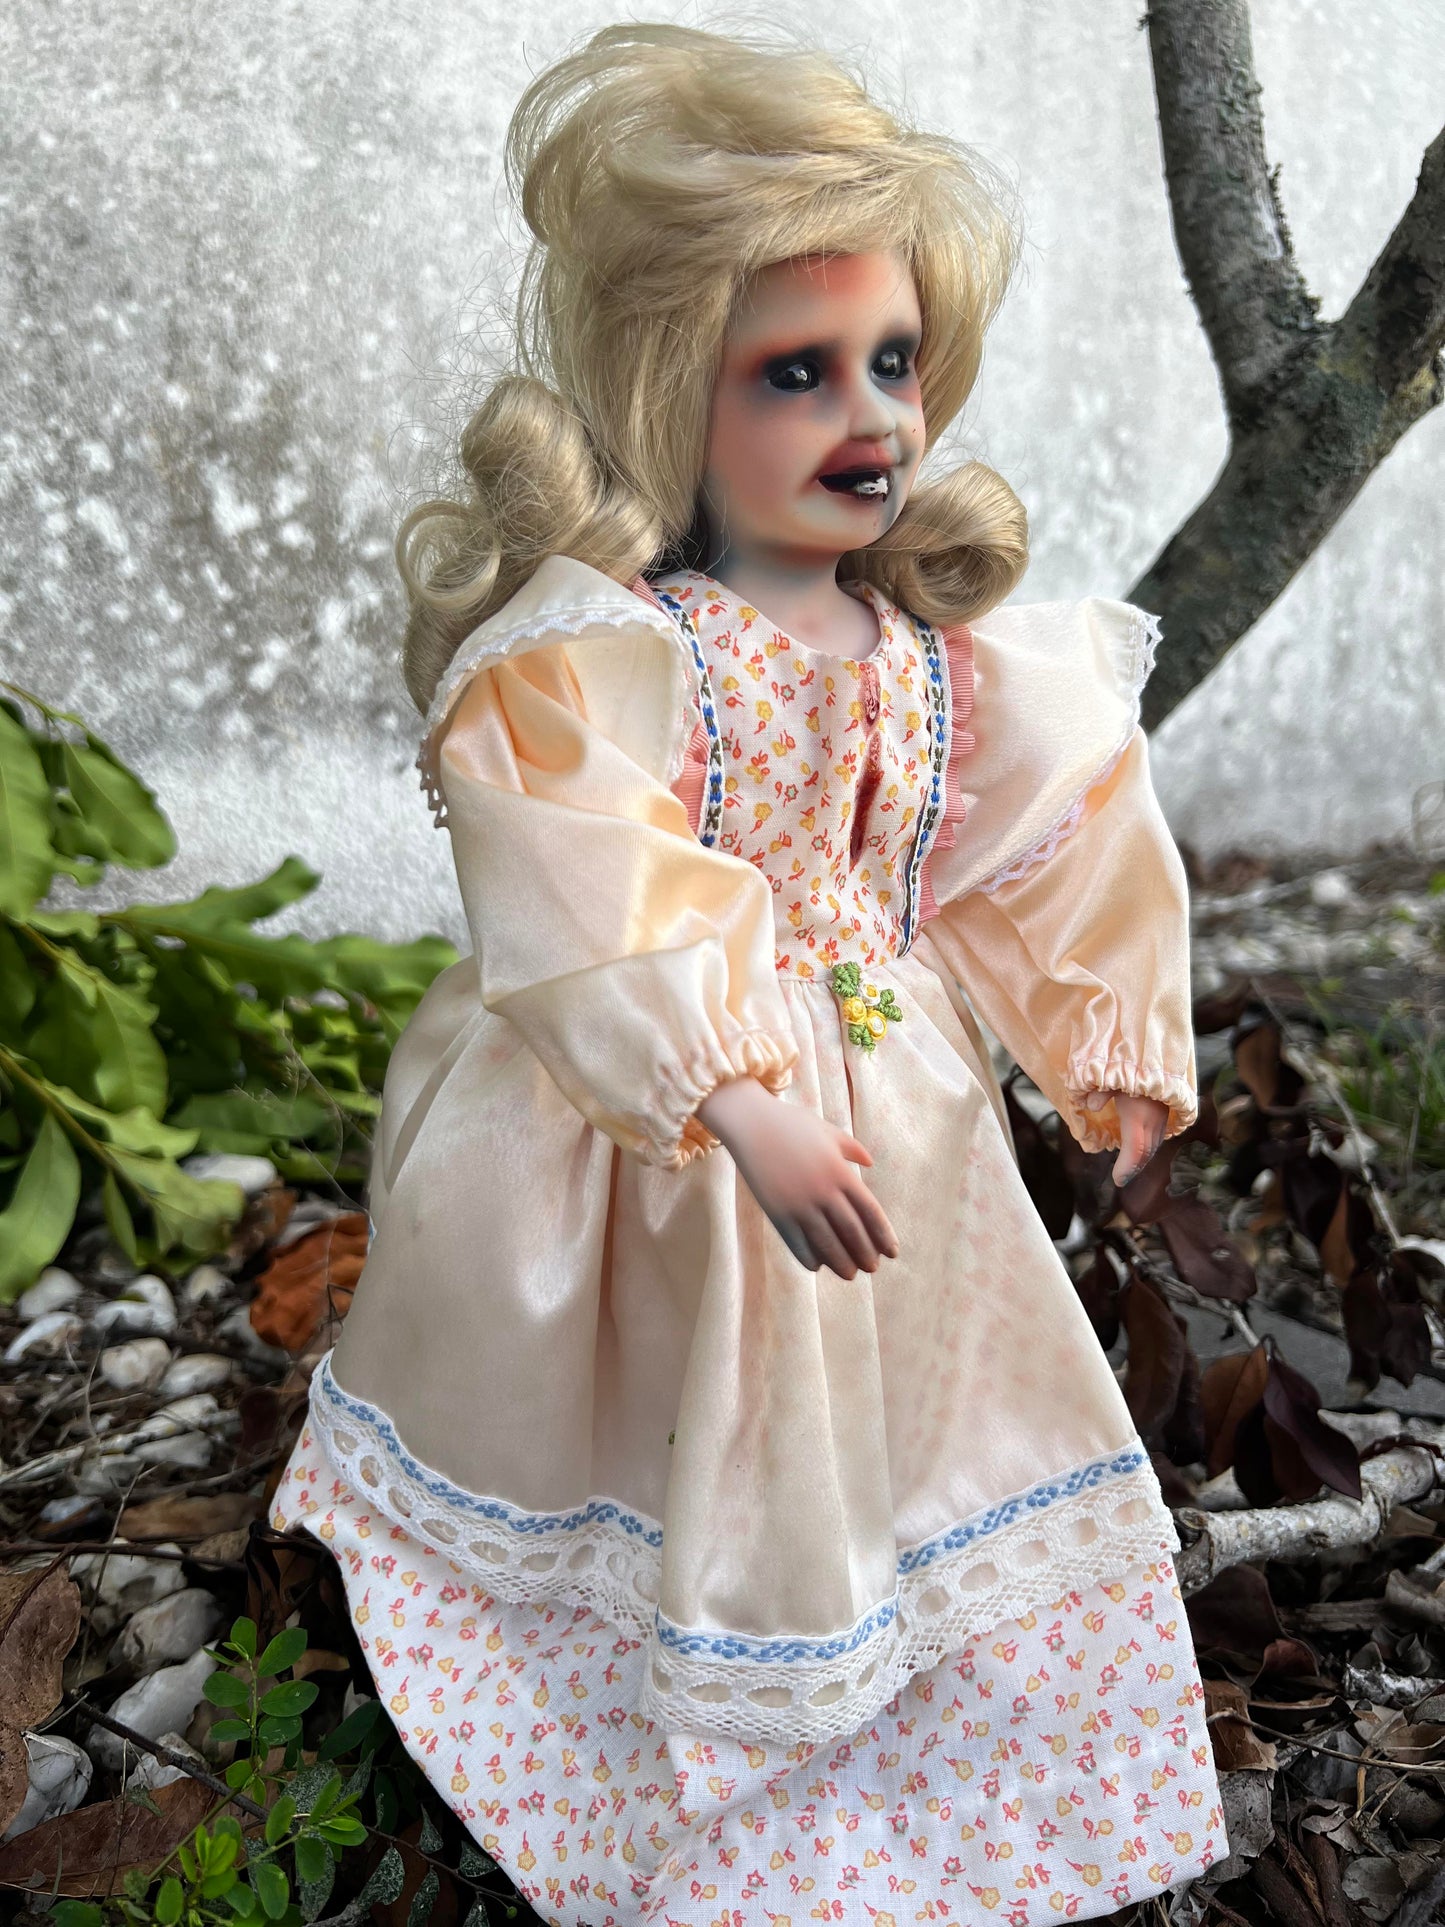 Meet Gretchen 14" Vintage Baby Porcelain witchy Creepy Haunted Spirit Infected Zombie Doll Scary Poltergeist Halloween Spooky Hand Painted